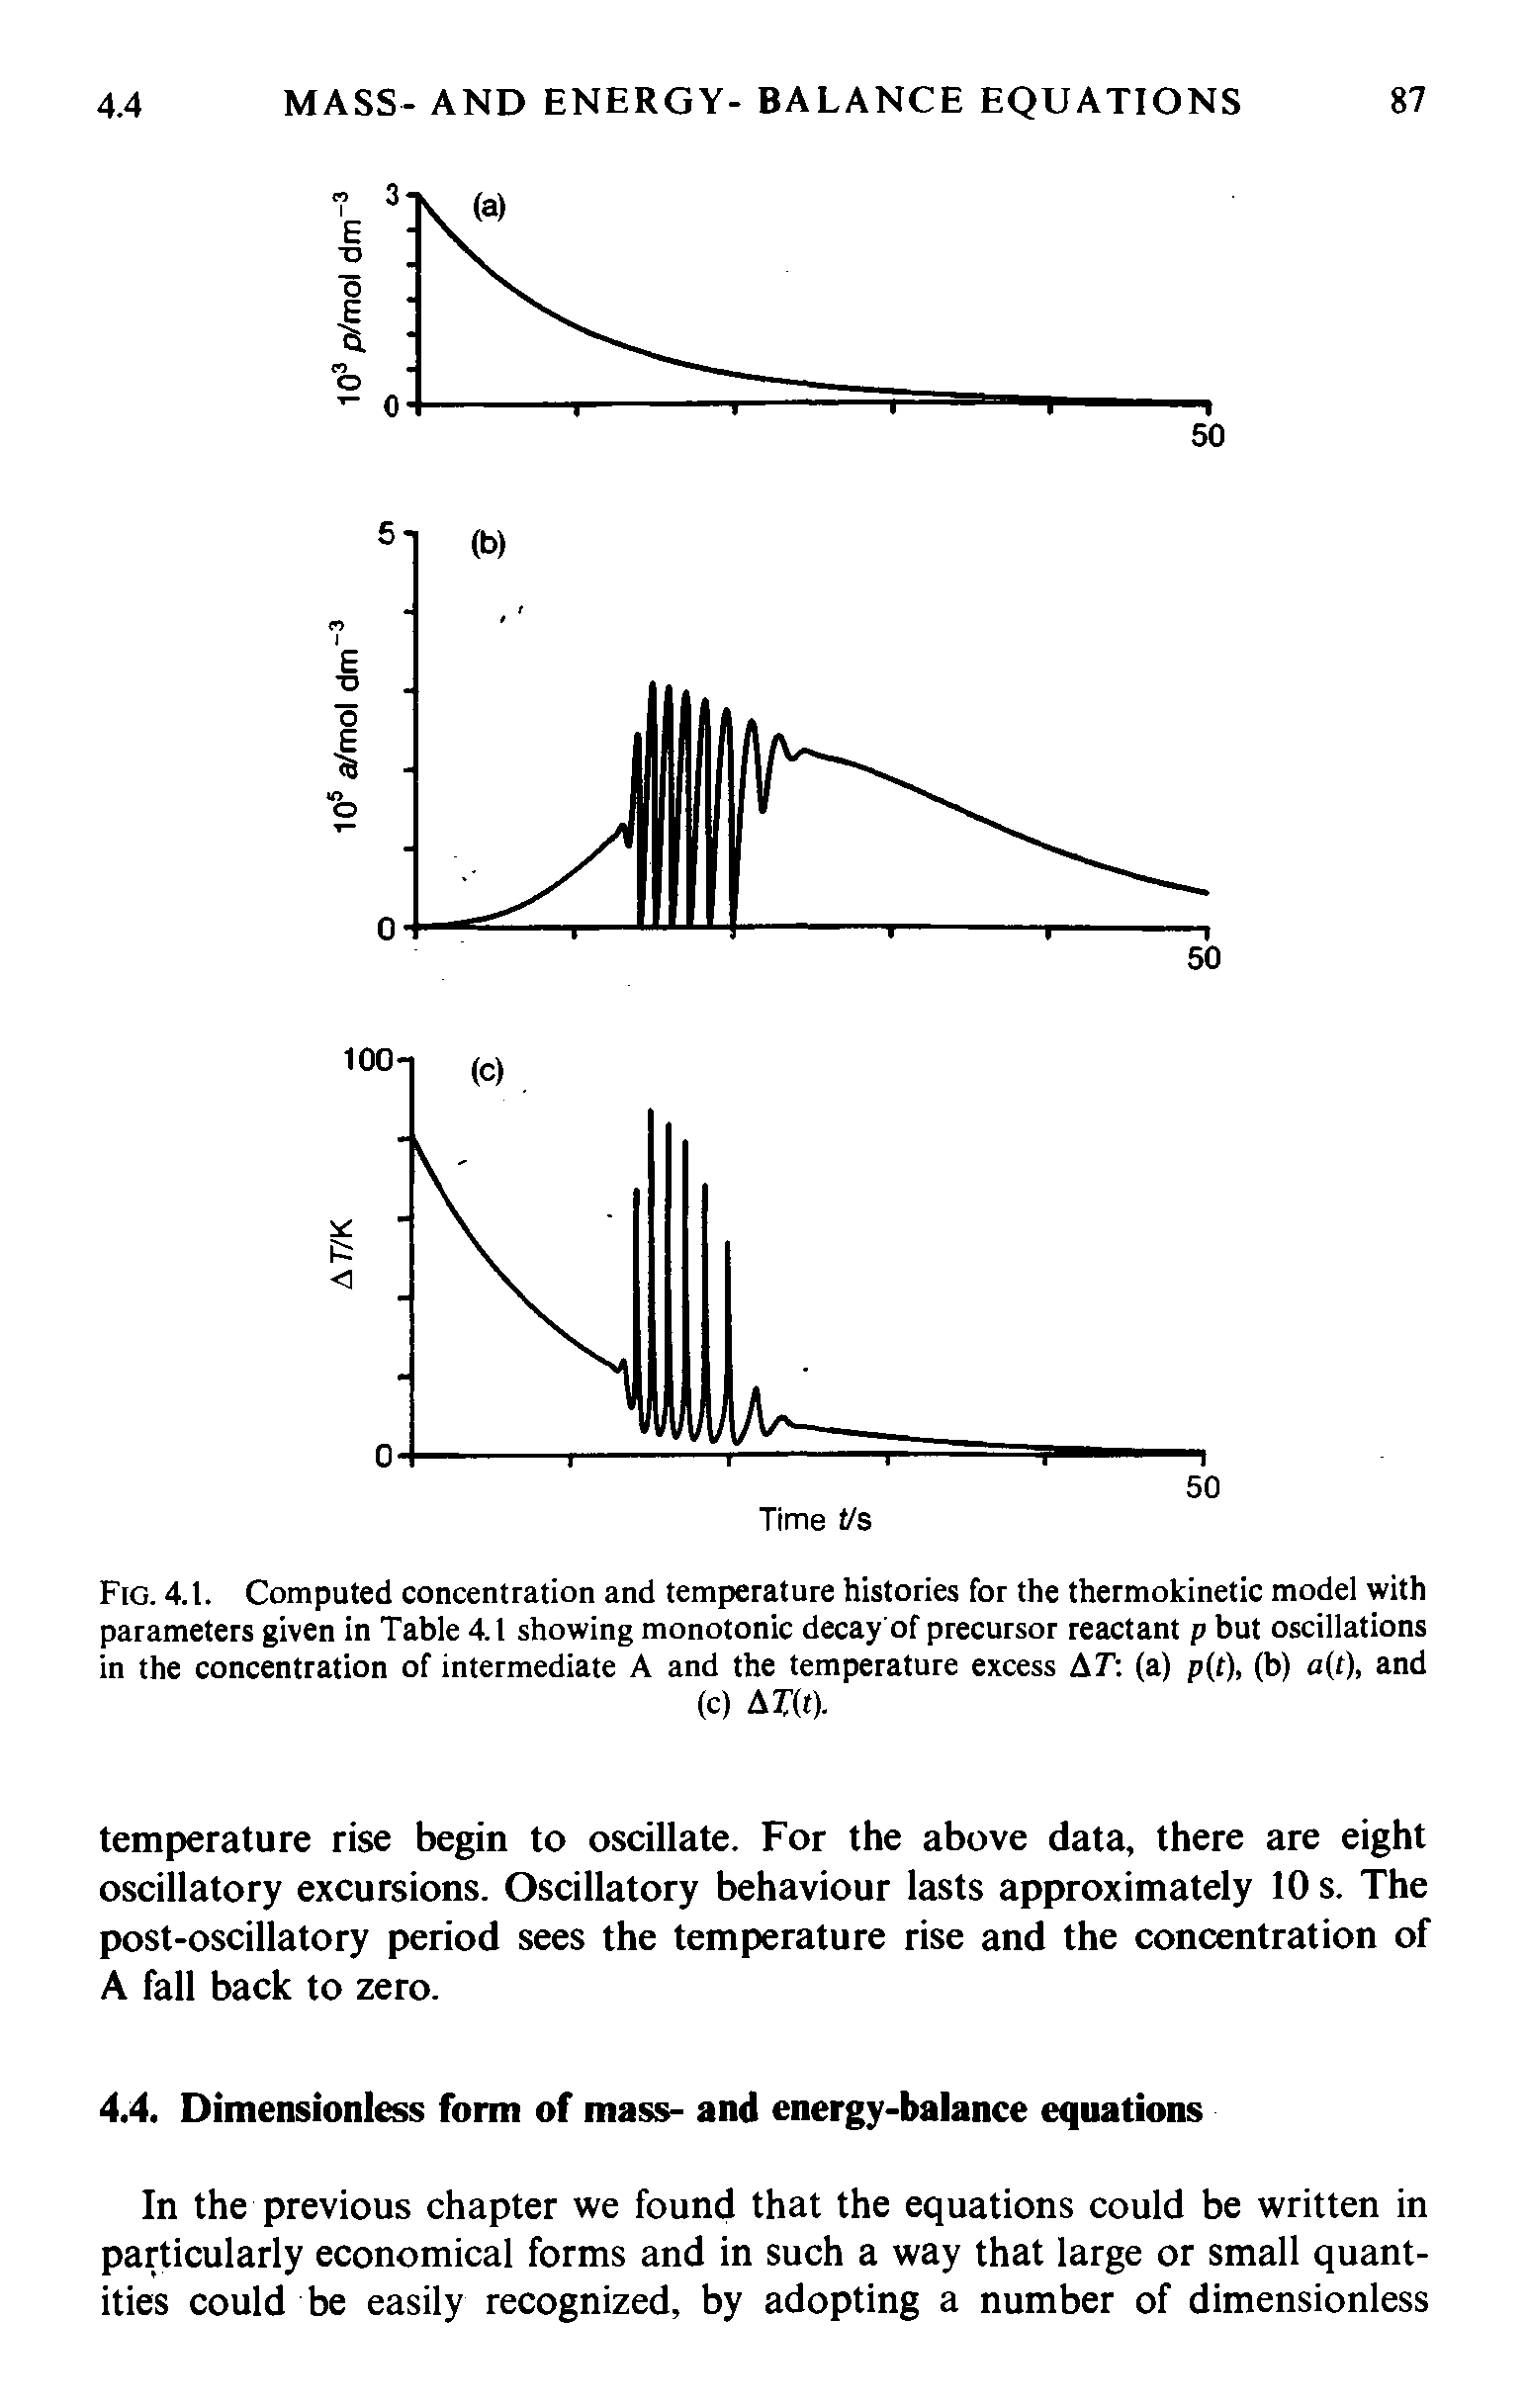 Fig. 4.1. Computed concentration and temperature histories for the thermokinetic model with parameters given in Table 4.1 showing monotonic decay of precursor reactant p but oscillations in the concentration of intermediate A and the temperature excess A7 (a) p(r), (b) a(t), and...